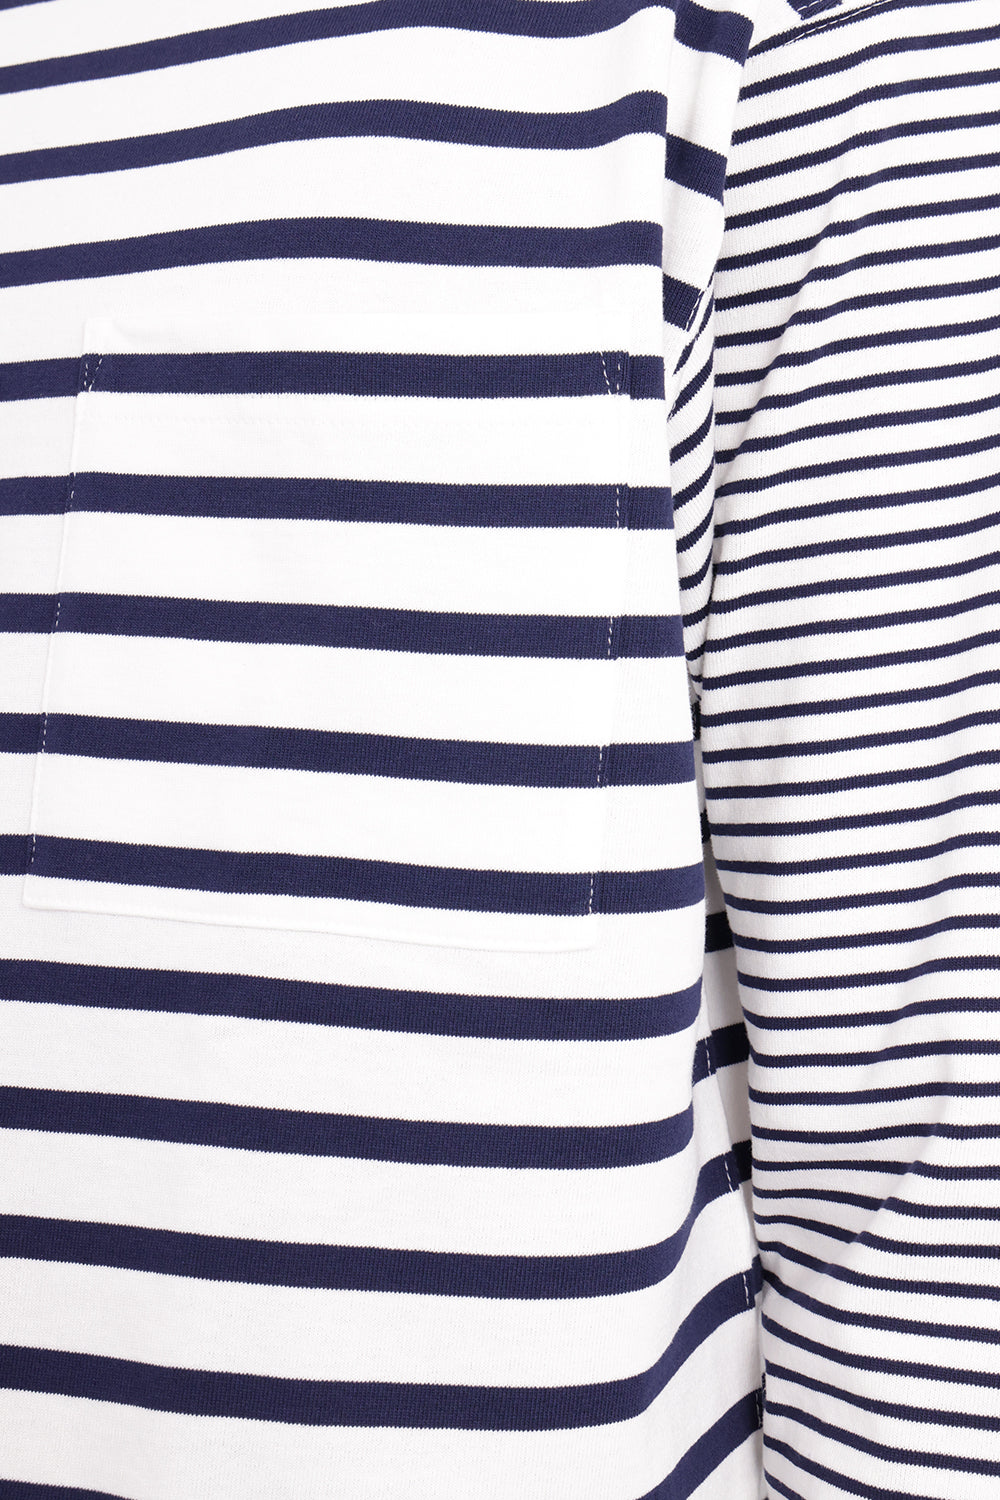 COMME DES GARCONS HOMME RTW Cotton Stitch Jersey with Horizontal Stripe | White/Navy